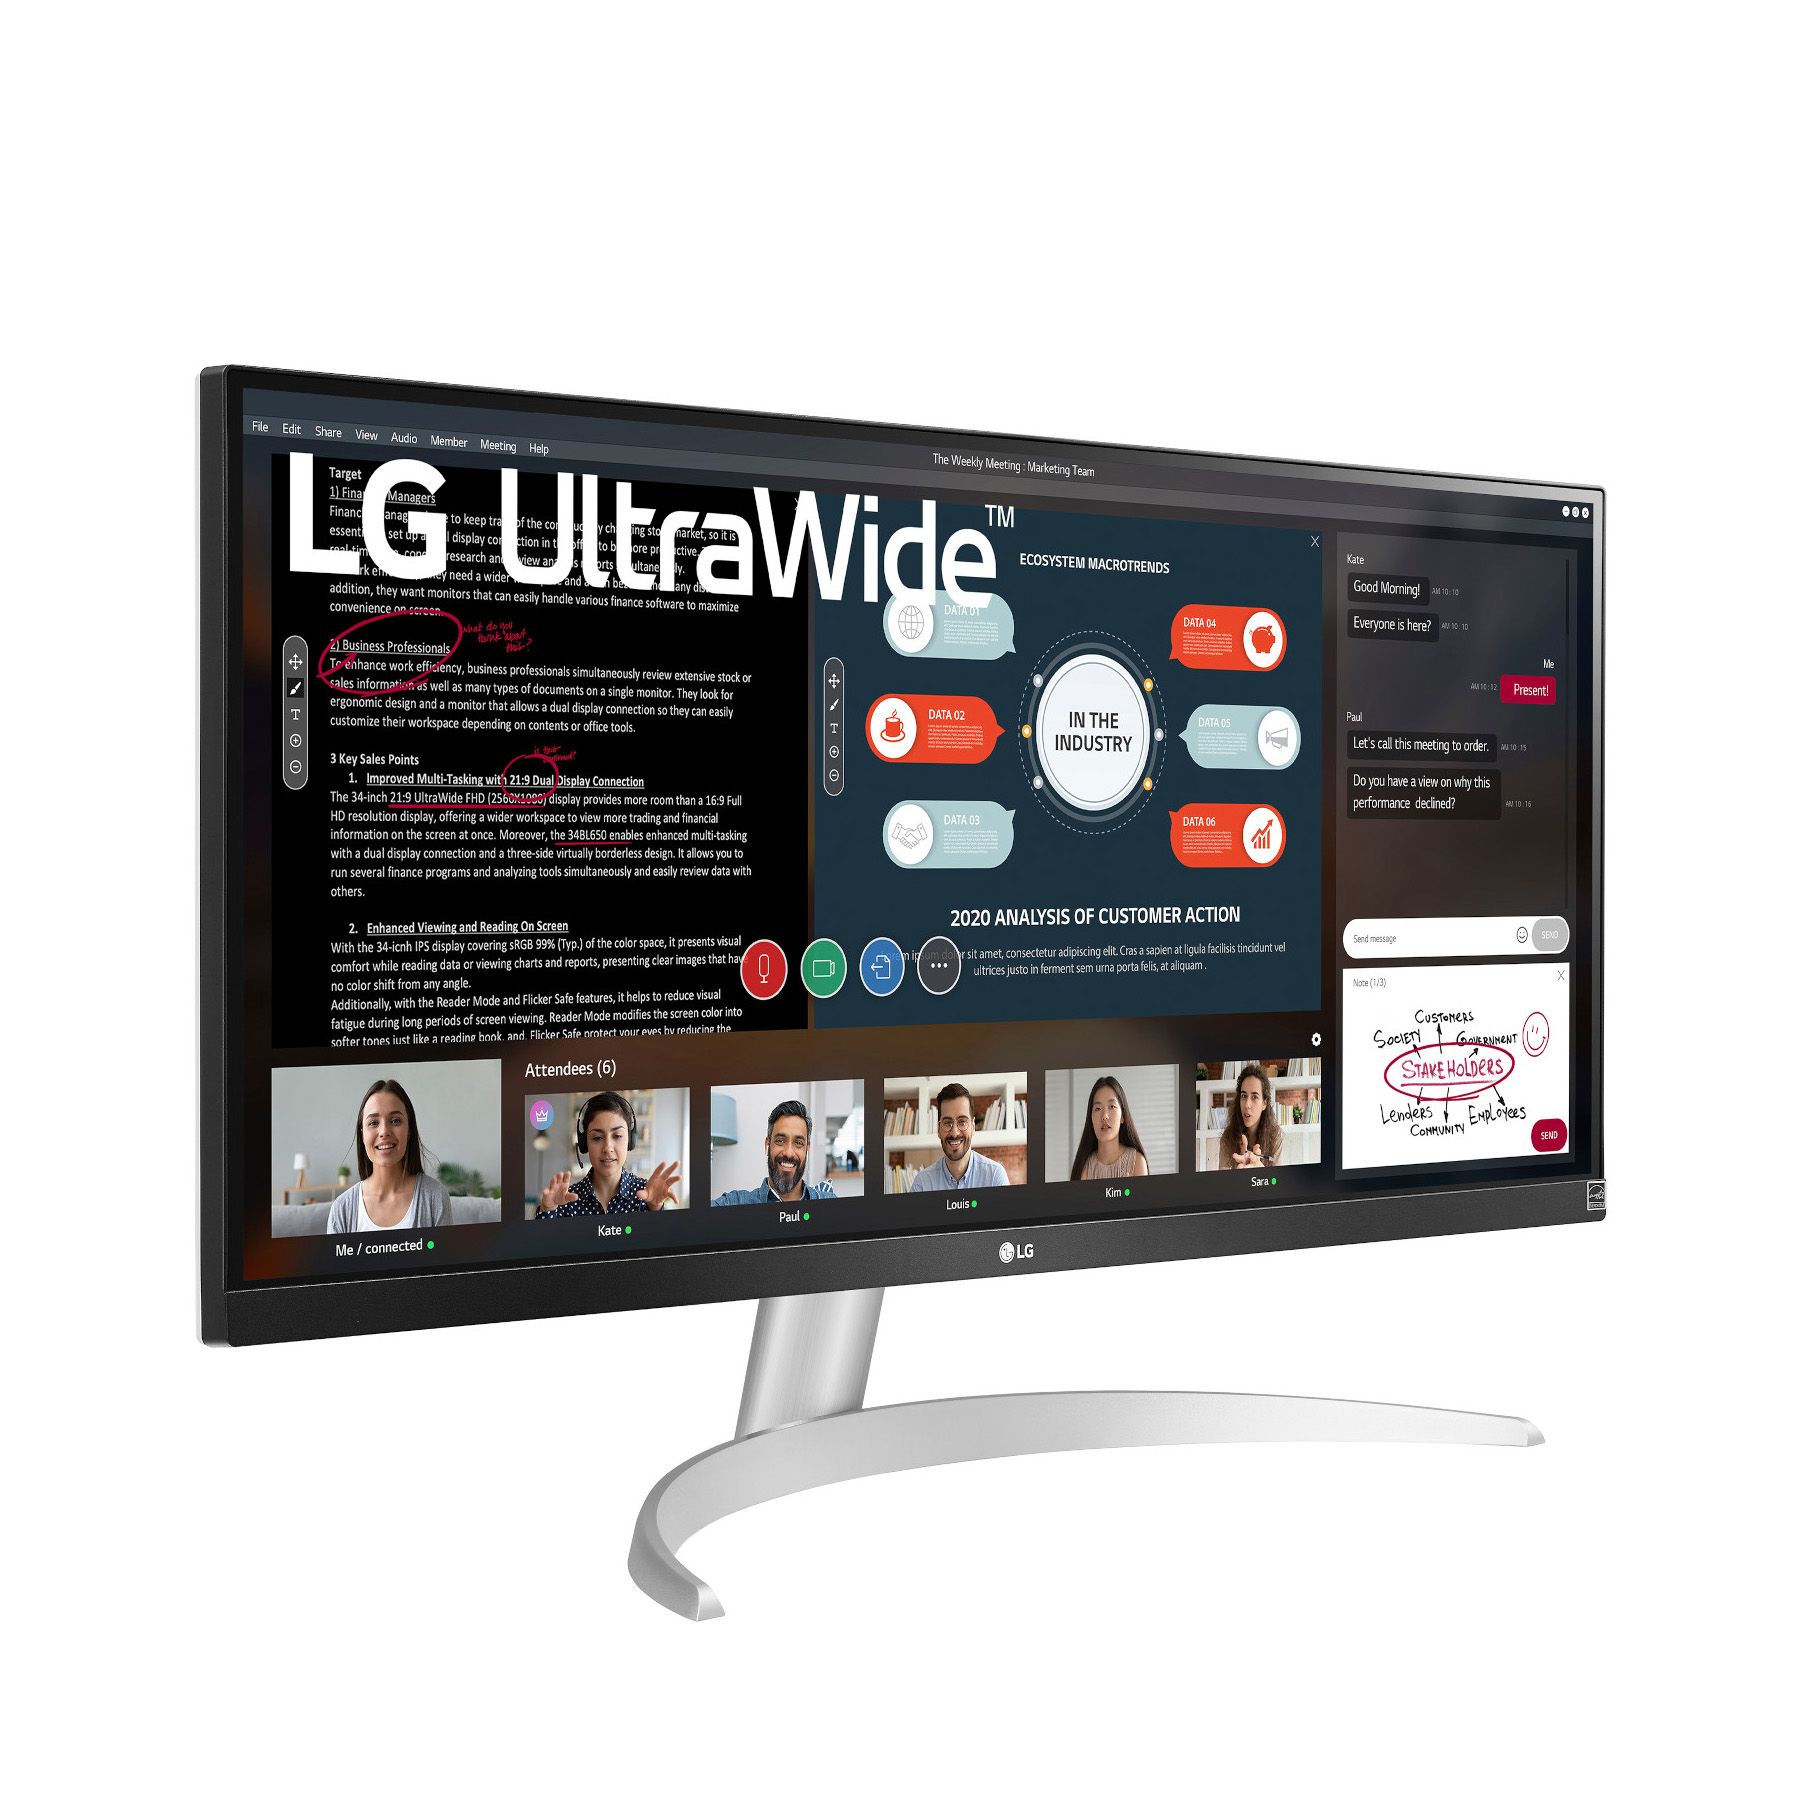 LG 29” IPS LED UltraWide FHD 100Hz AMD FreeSync Monitor with HDR